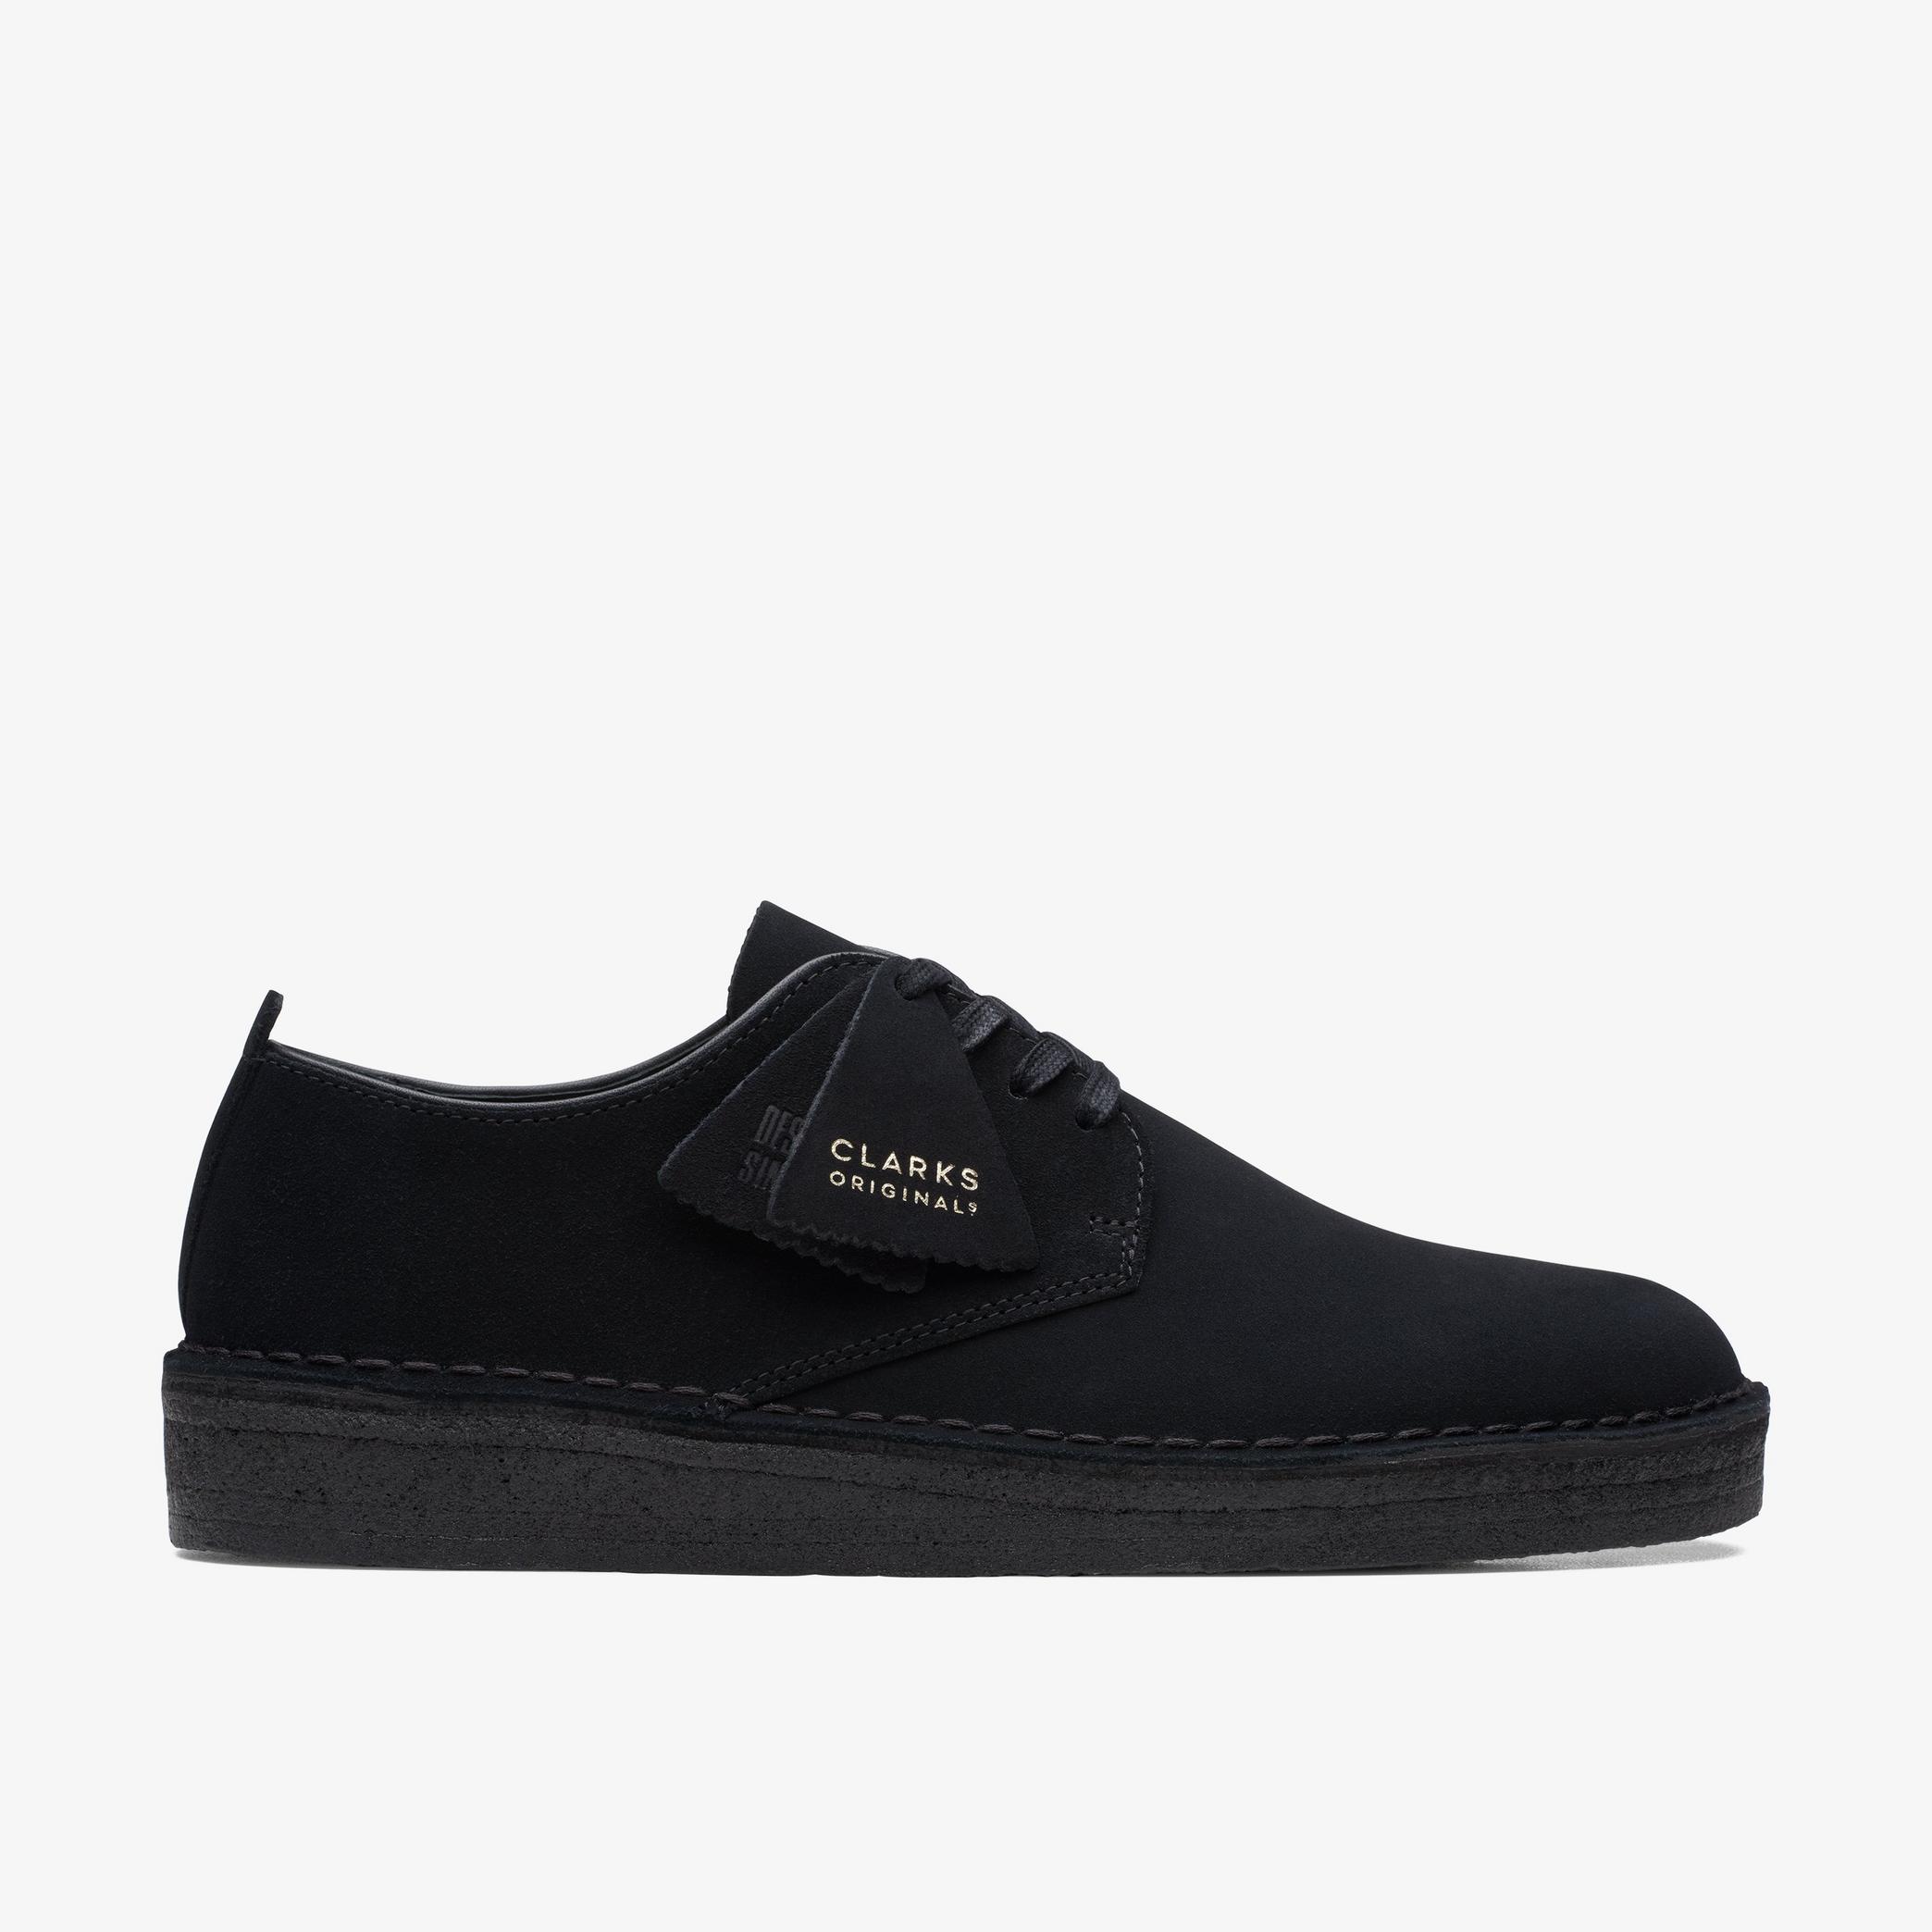 Coal London Black Suede Desert Boots, view 1 of 7